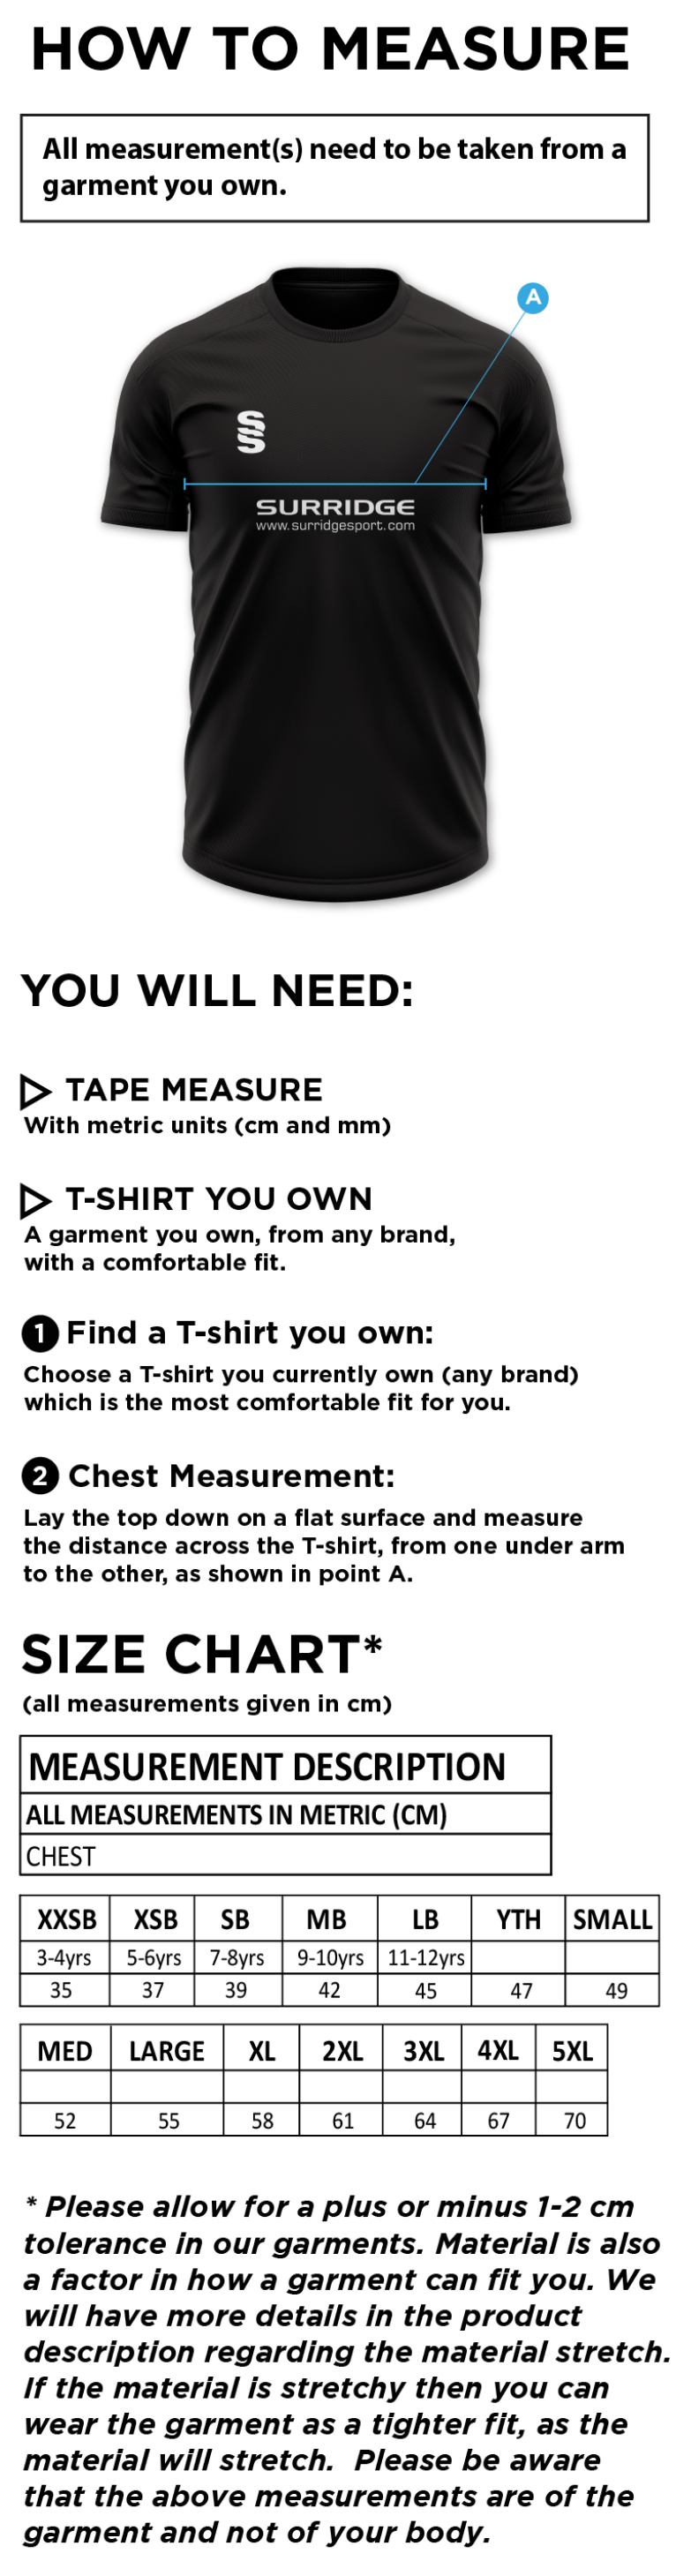 Youth's Dual Games Shirt : Purple - Size Guide